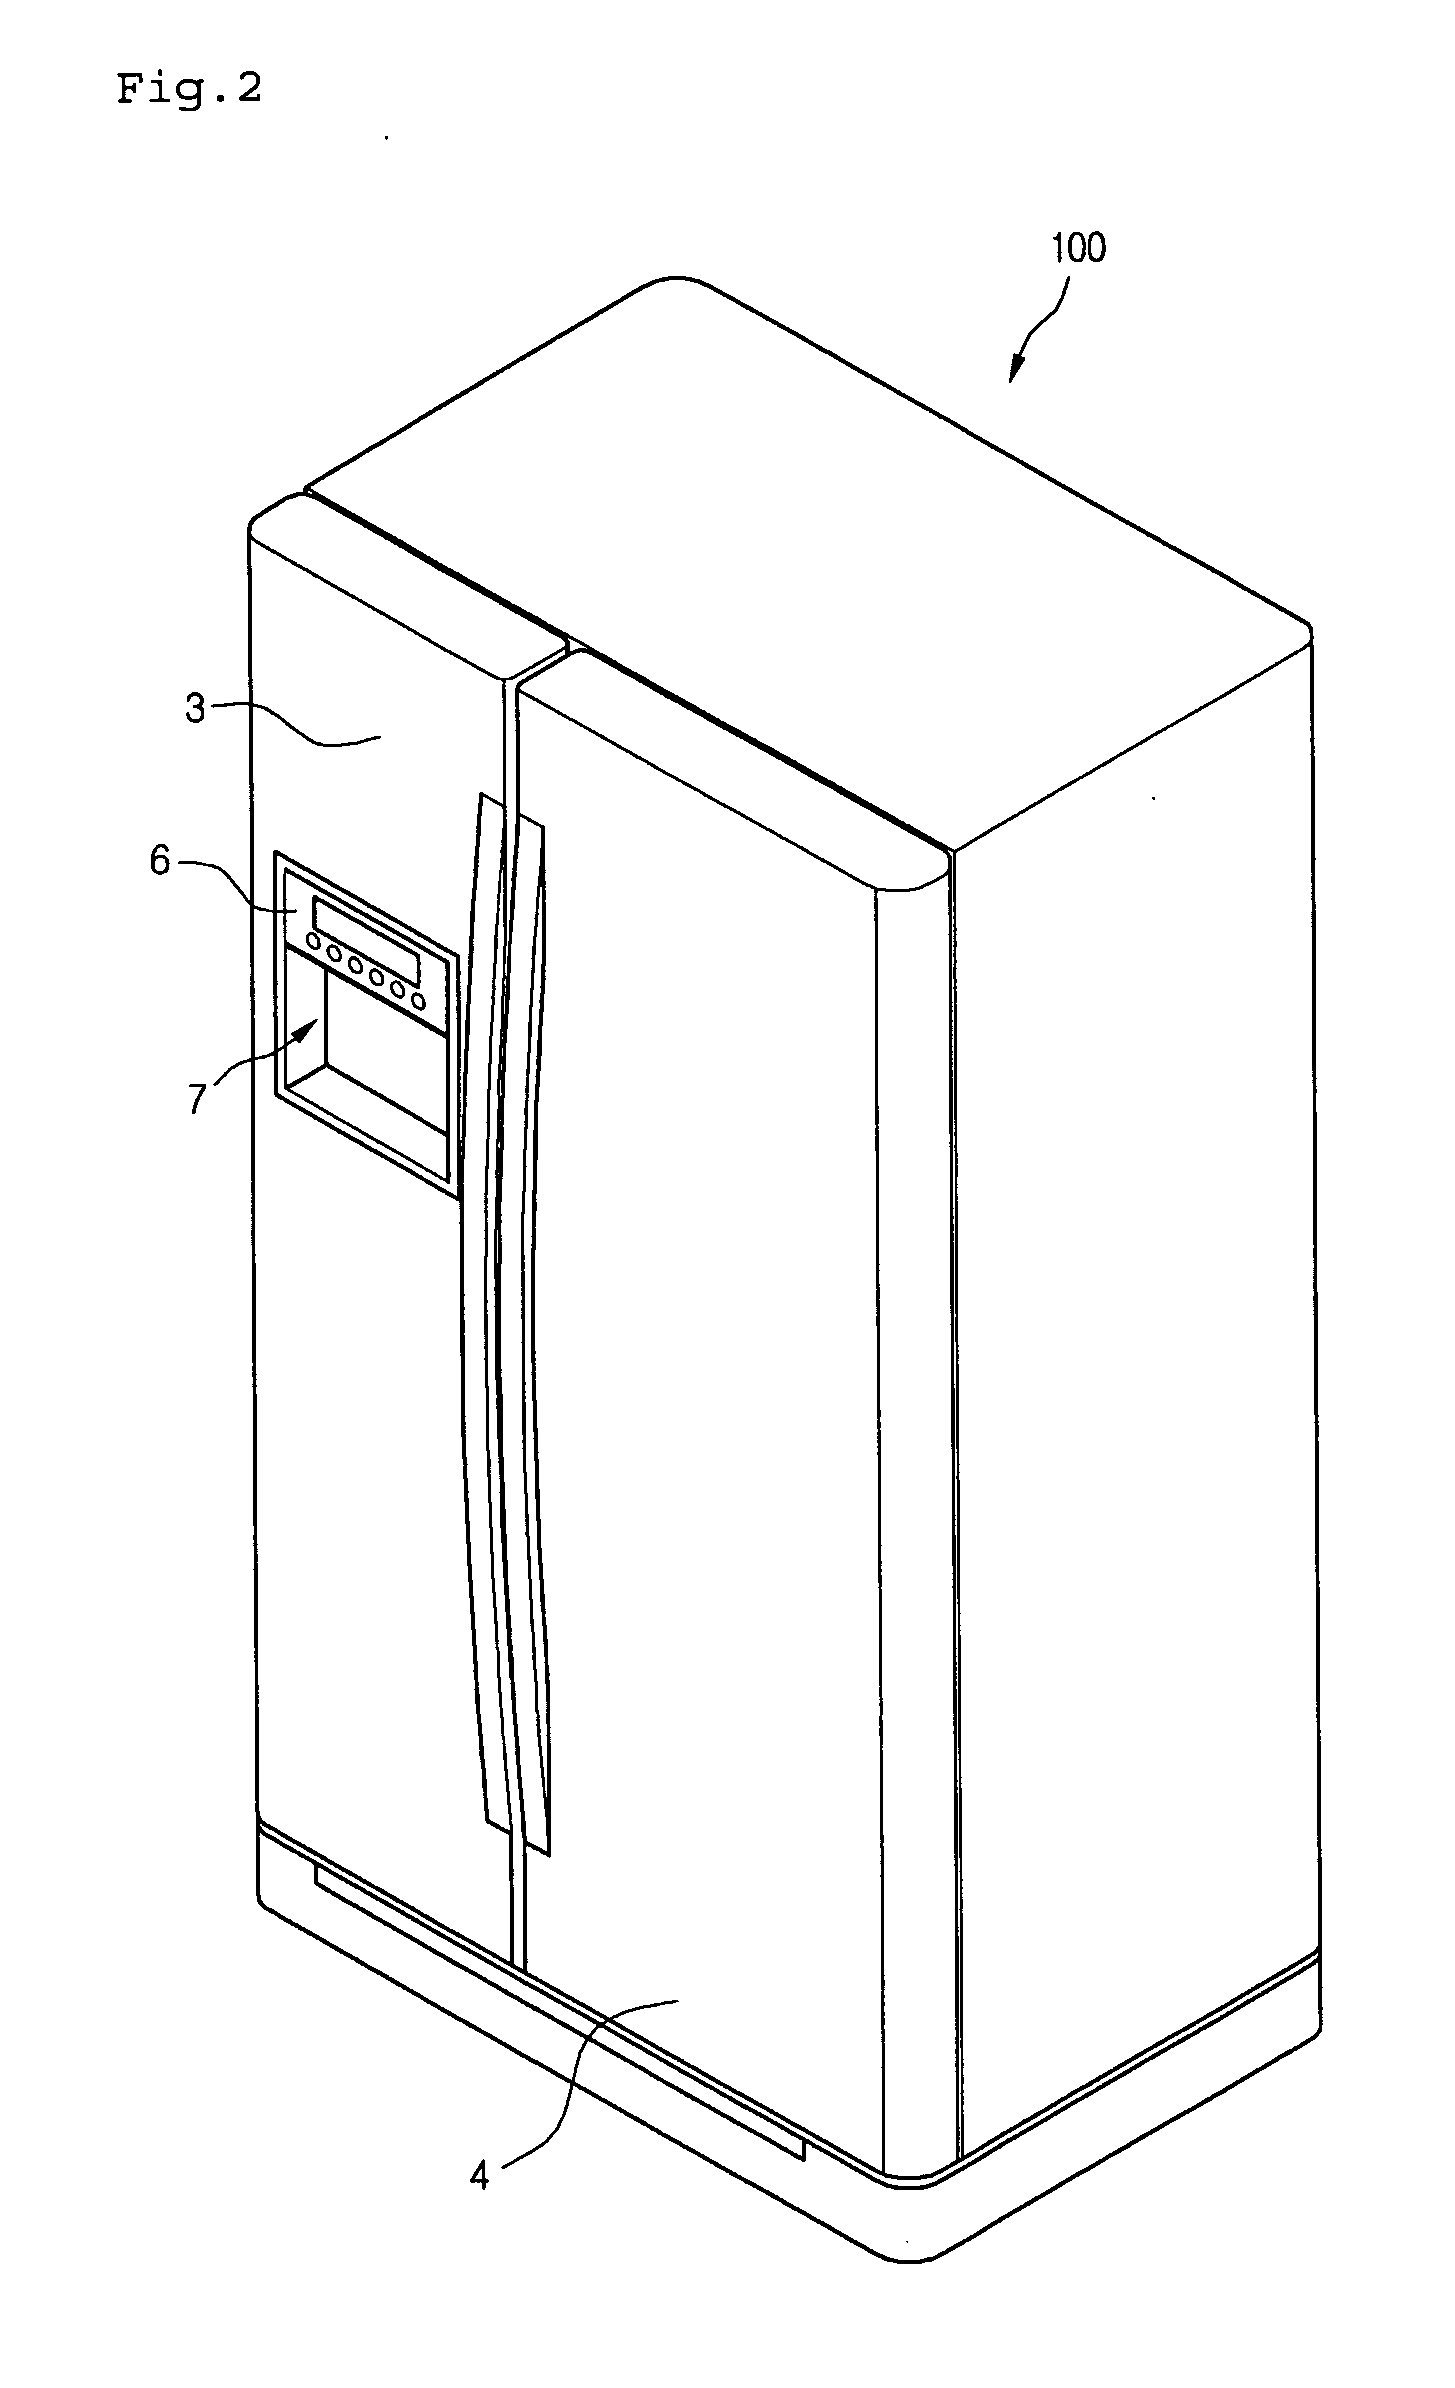 Cold air path structure of refrigerator